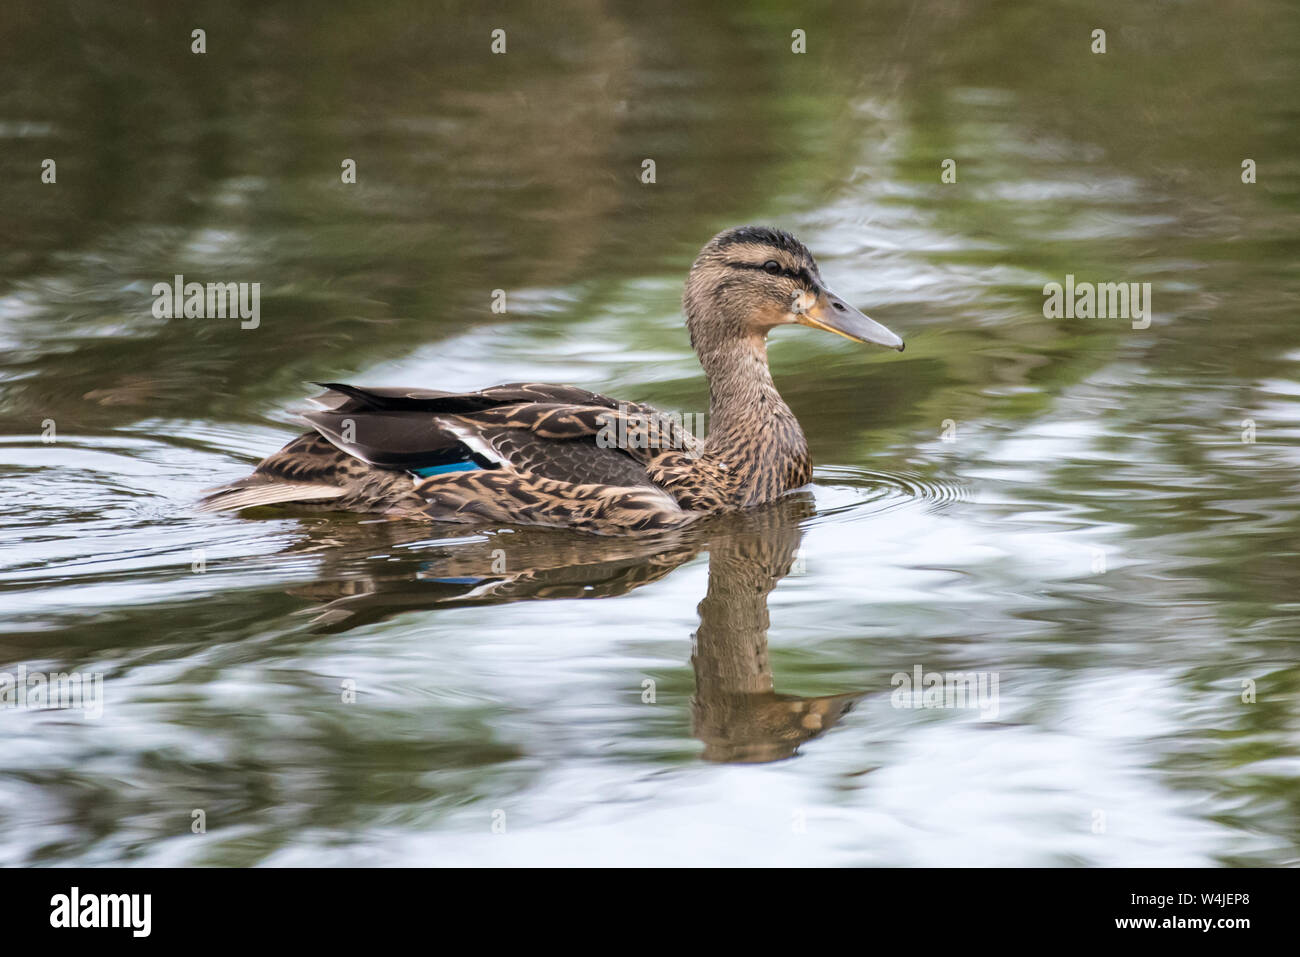 Blue Winged Teal Duck casting a reflection on estuary water surface while remaining afloat. Stock Photo